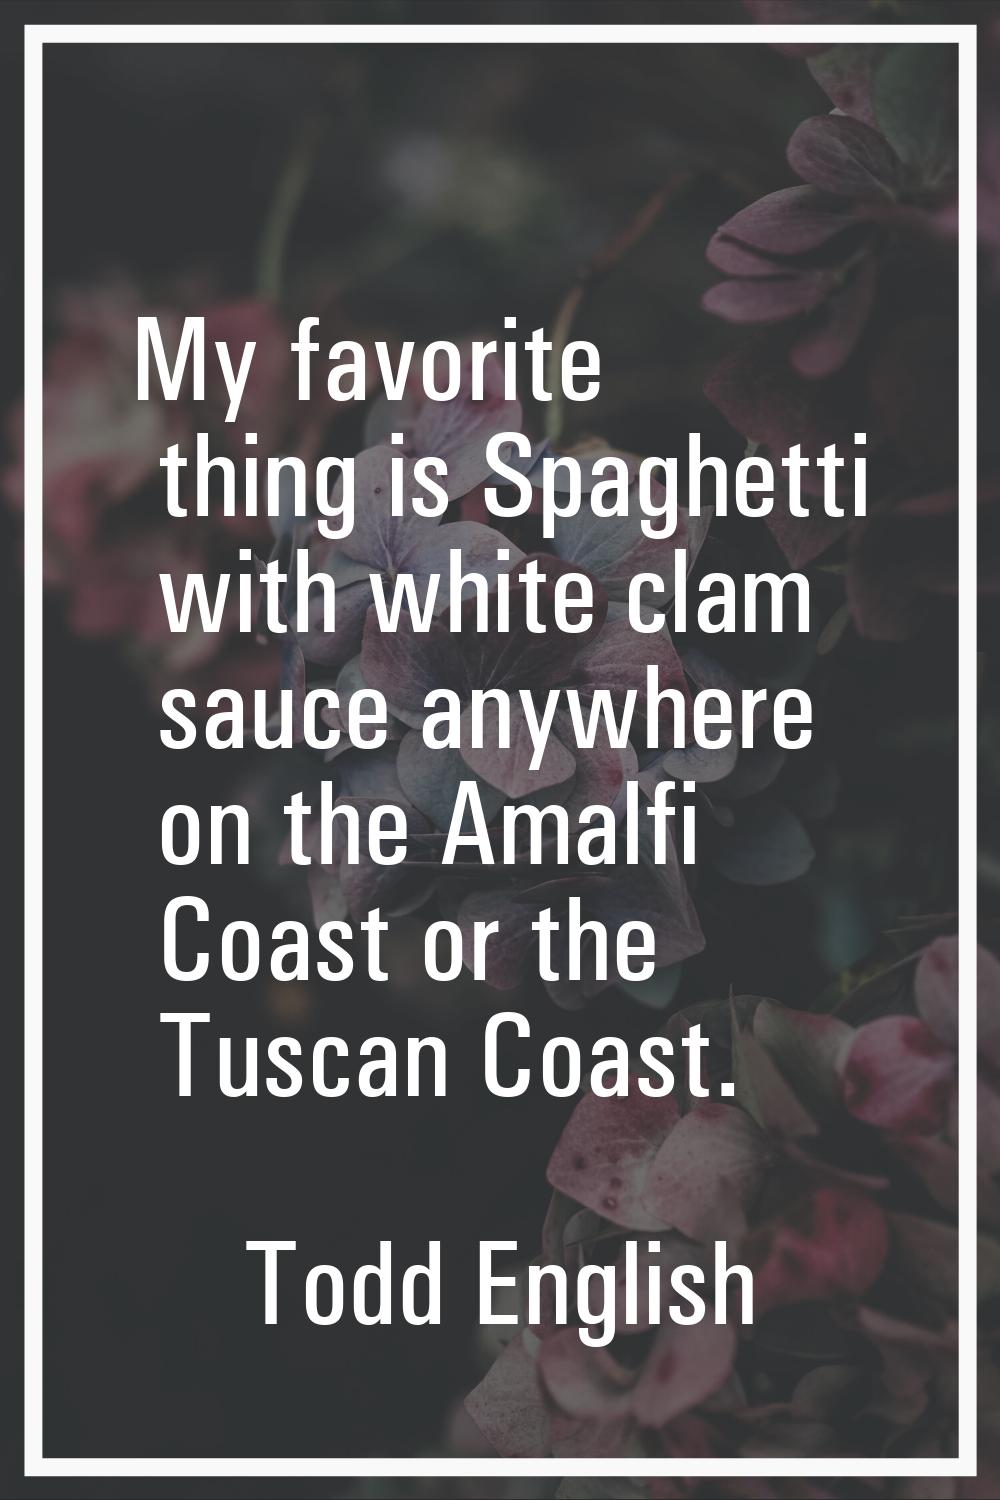 My favorite thing is Spaghetti with white clam sauce anywhere on the Amalfi Coast or the Tuscan Coa